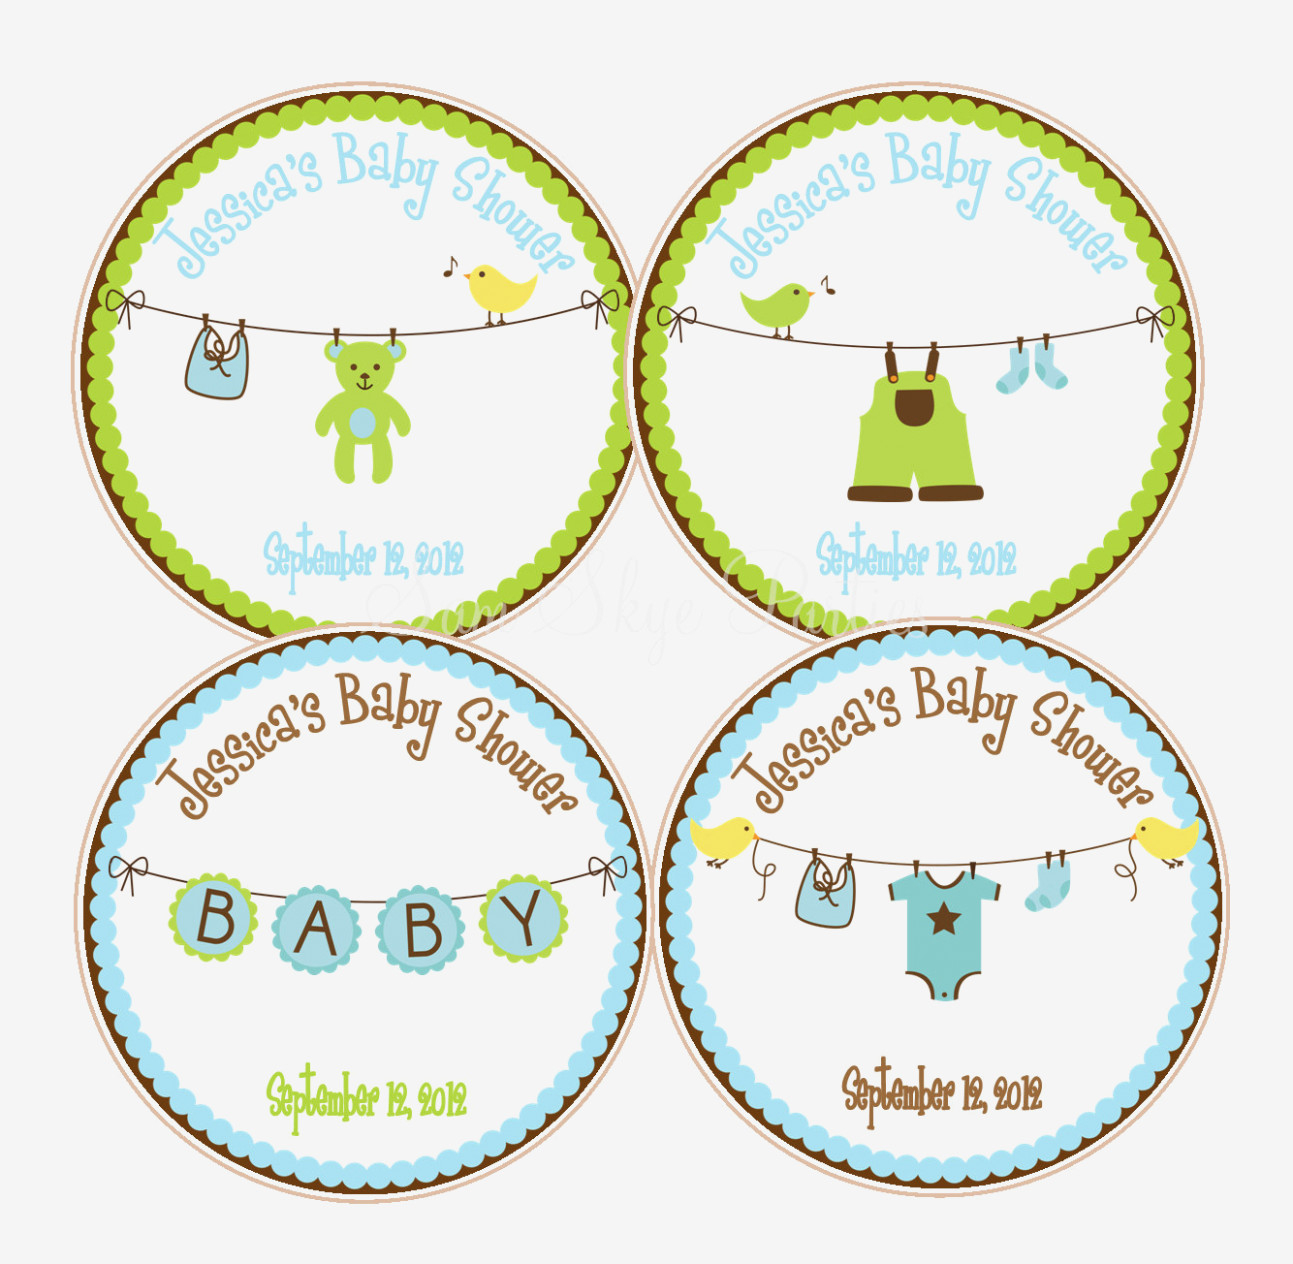 Baby Shower Labels Templates Favor Wording Label Ideas Tags Diy Free - Free Printable Baby Shower Favor Tags Template